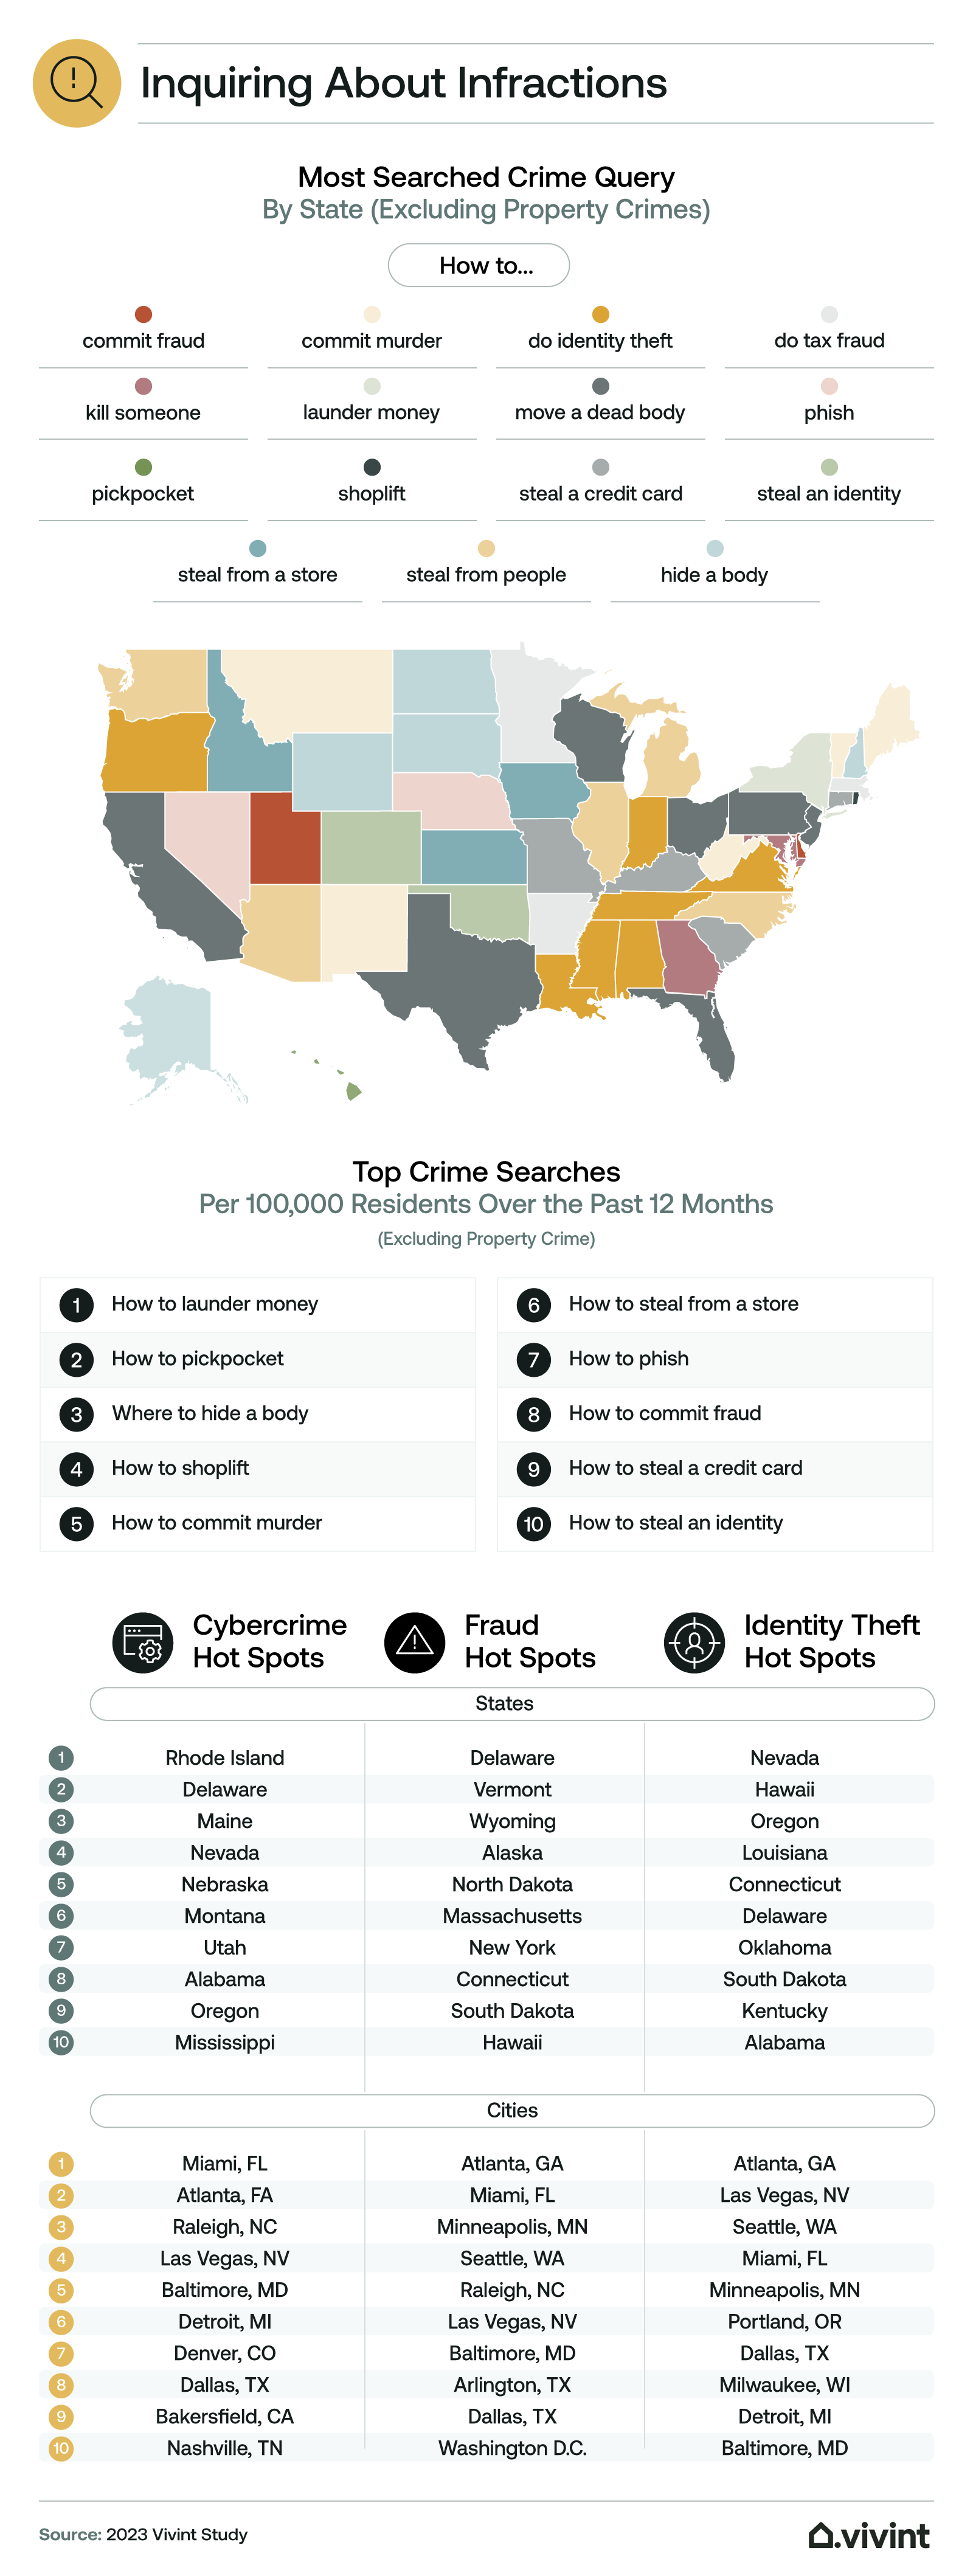 Information about the most-searched crimes by state.